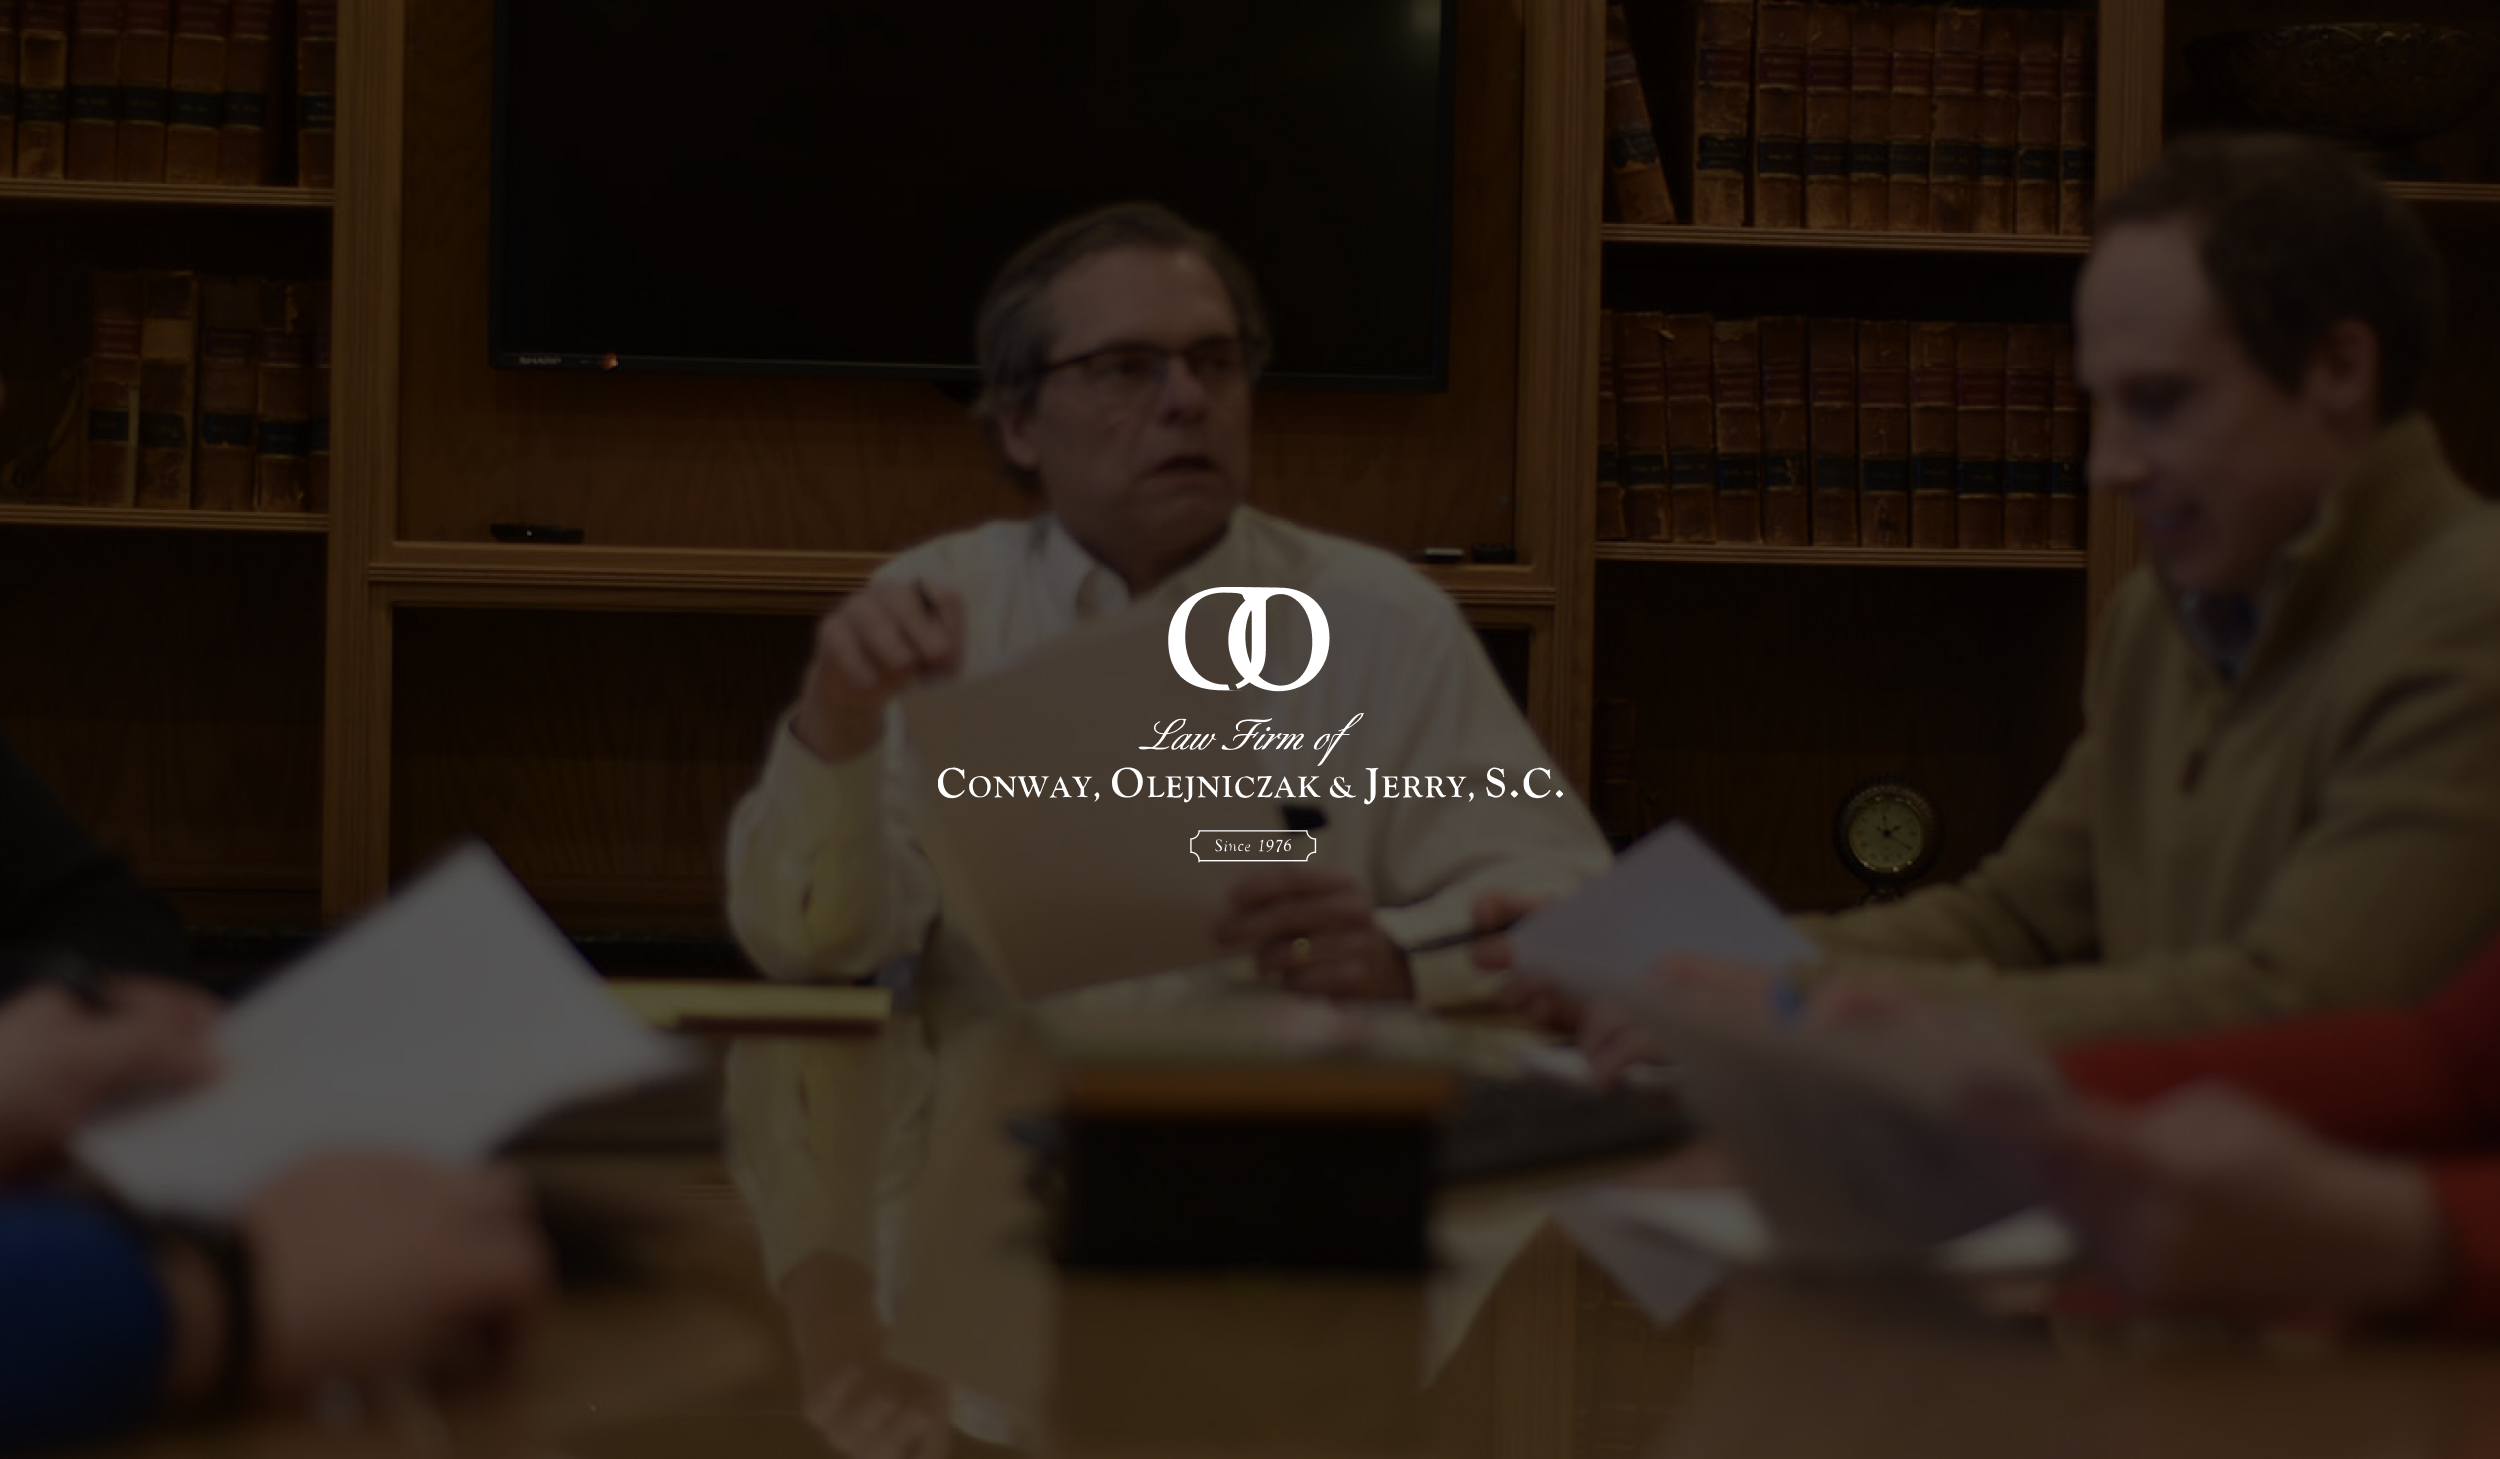 Law Firm of Conway, Olejniczak & Jerry, S.C. Project cover